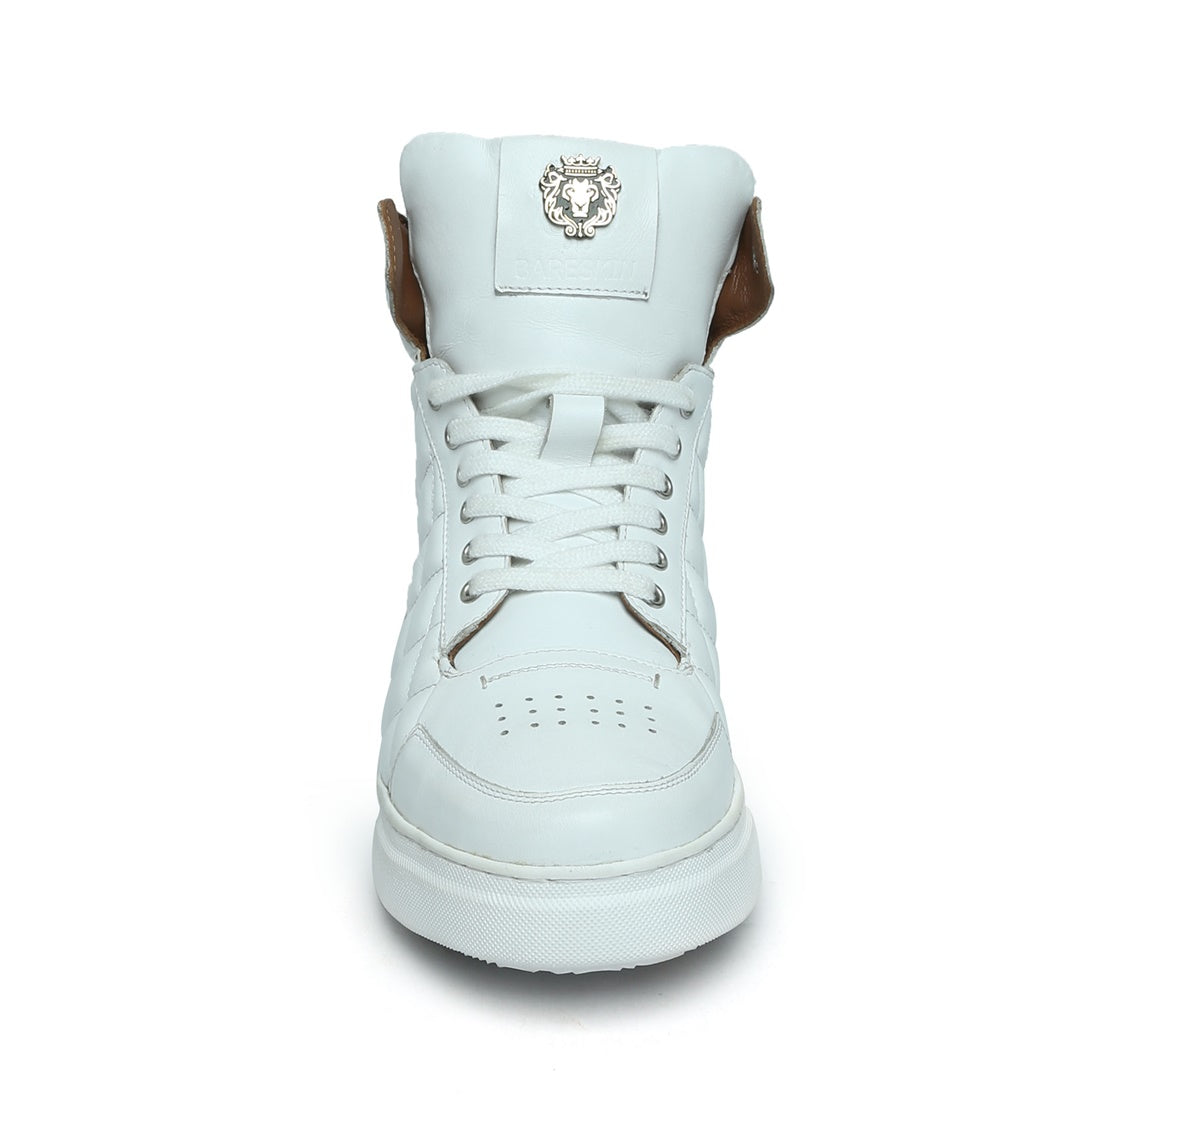 Mid-Top White Leather Sneaker with Diamond Stitch Pattern by Brune & B